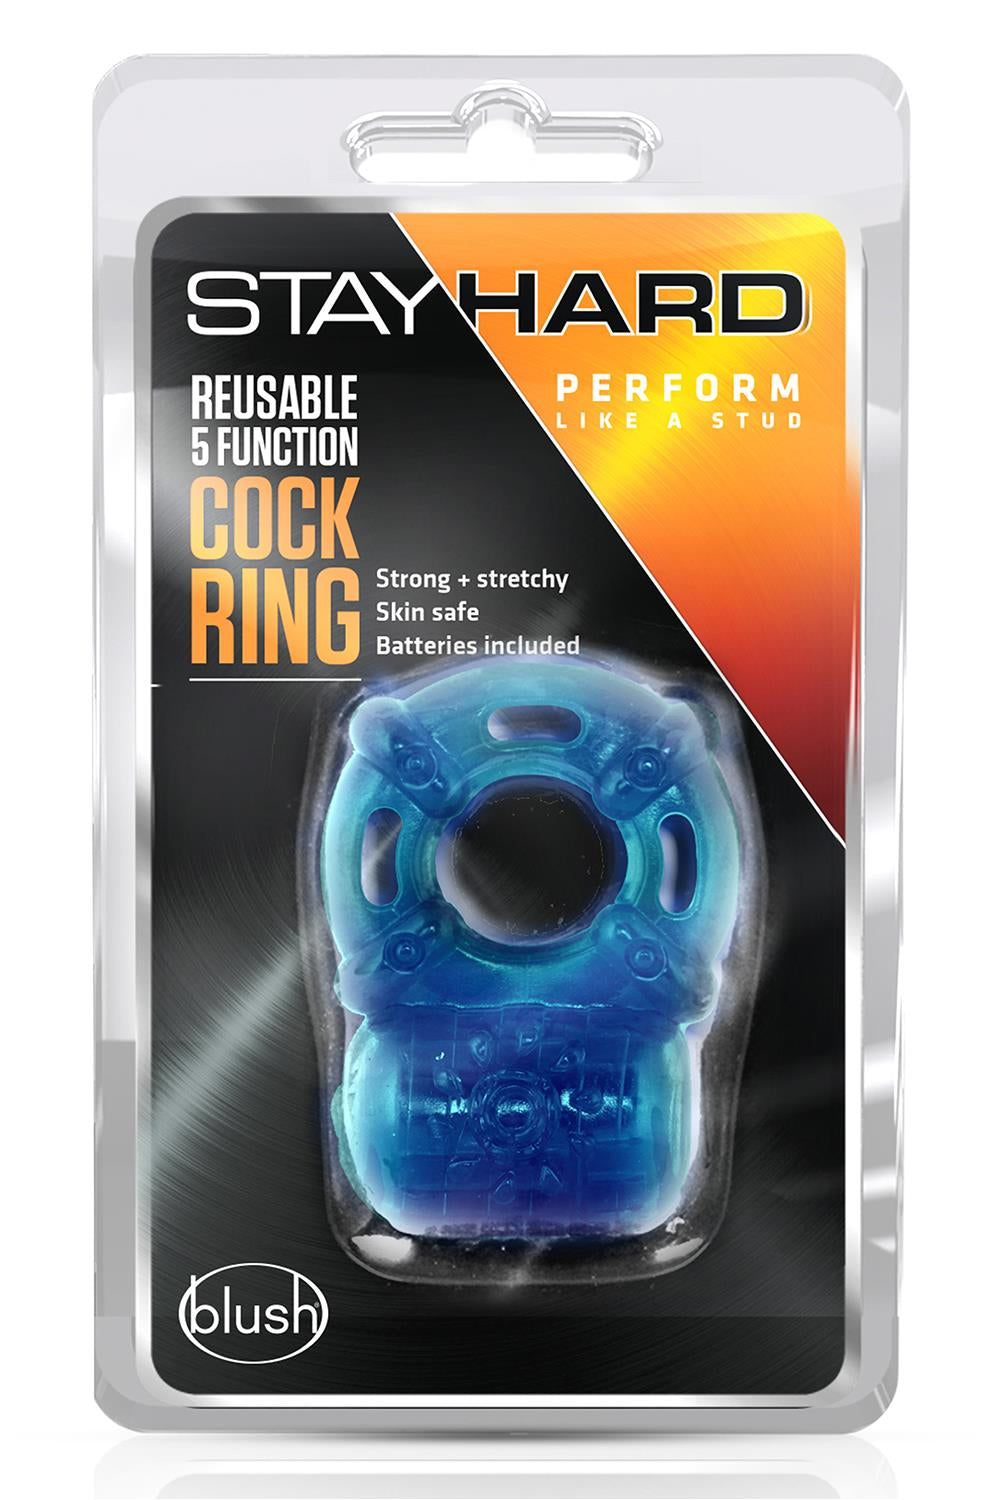 Stay Hard Reusable 5function Cock Ring